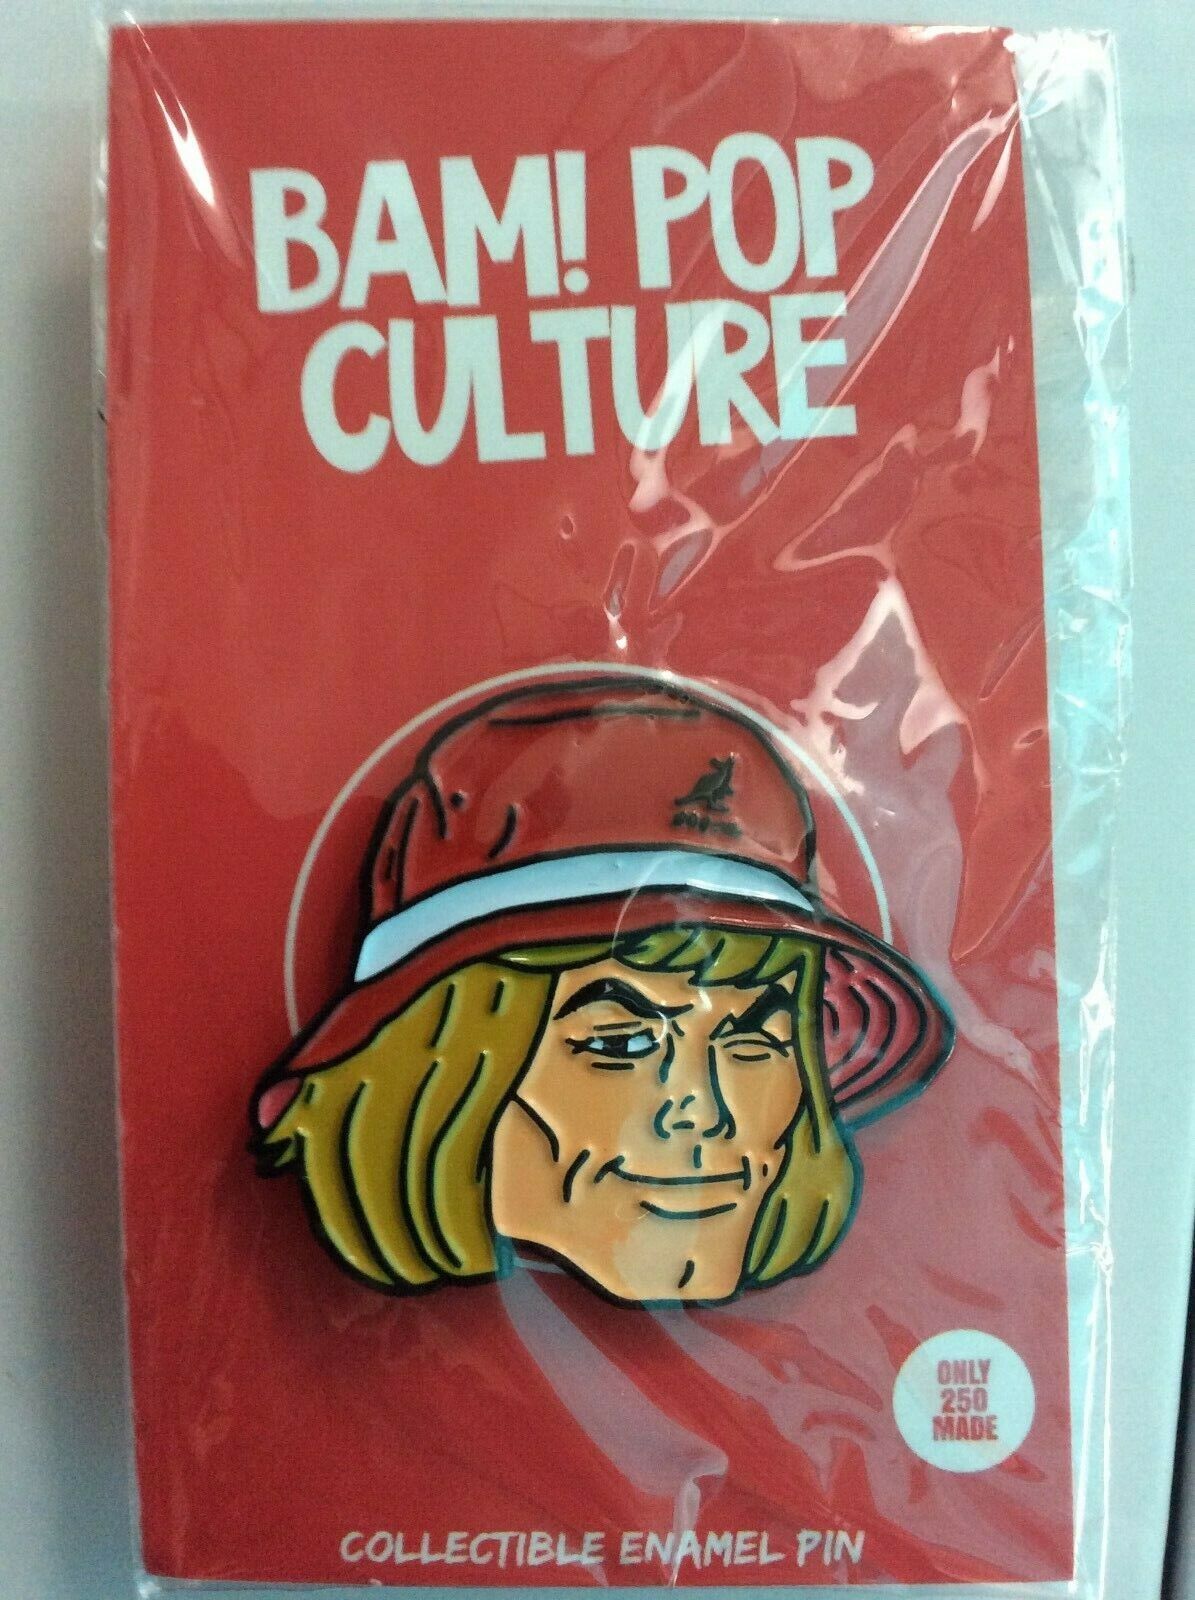 He Man  Retro Iconic Pin Bam Box Exclusive Nick Cocozza Variant ONLY 250 MADE